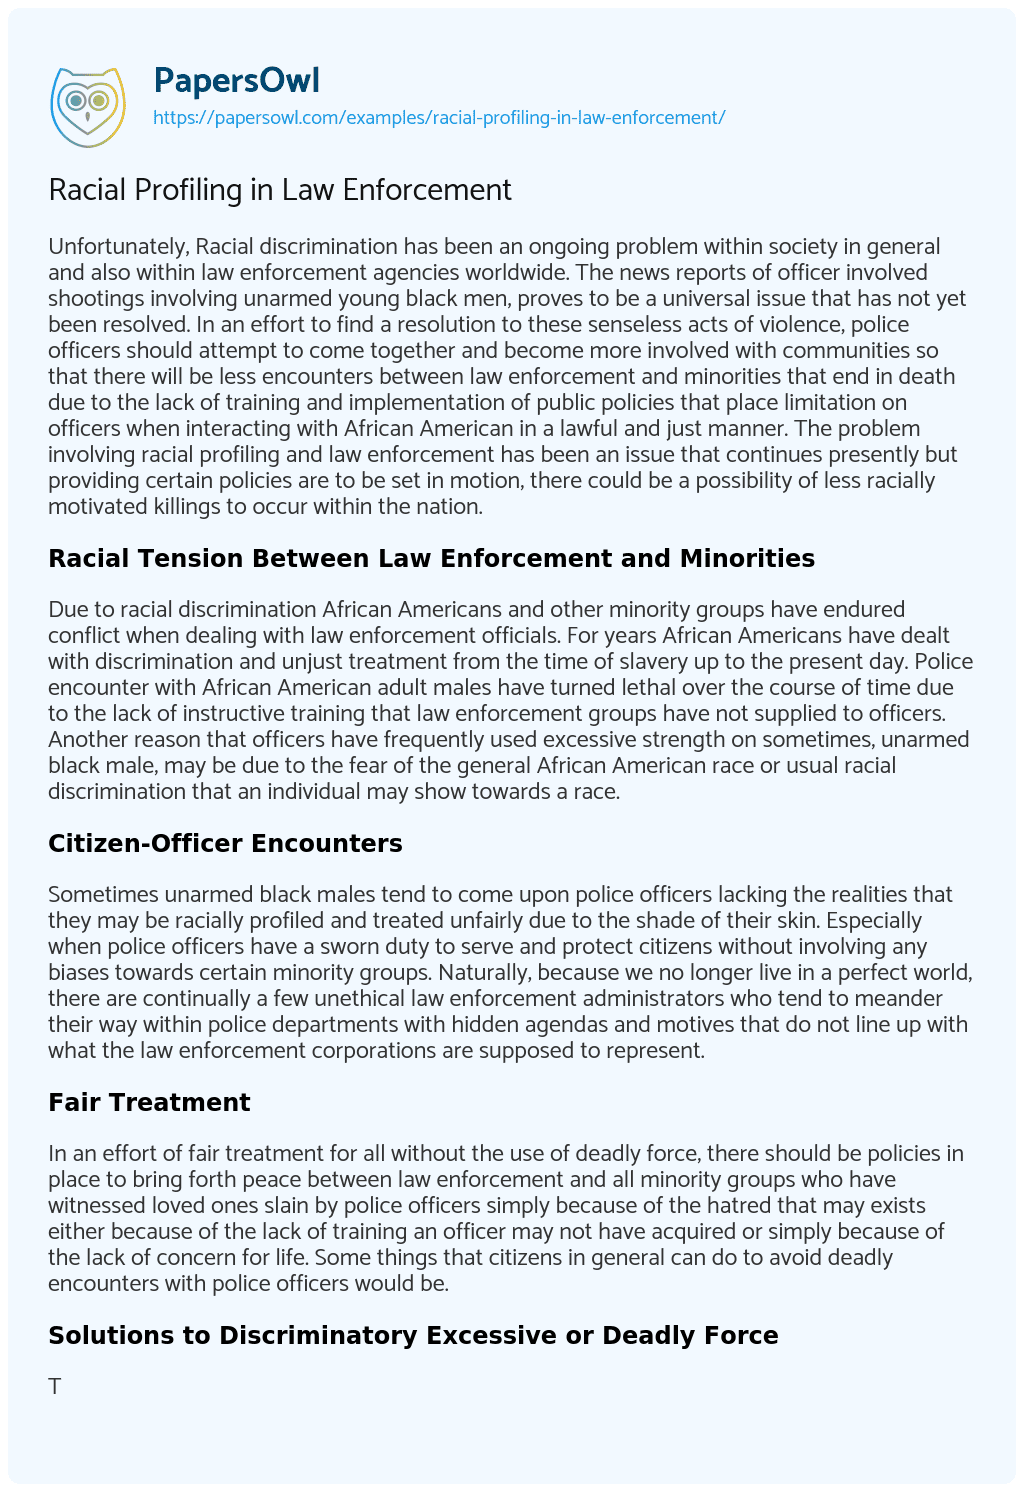 Essay on Racial Profiling in Law Enforcement